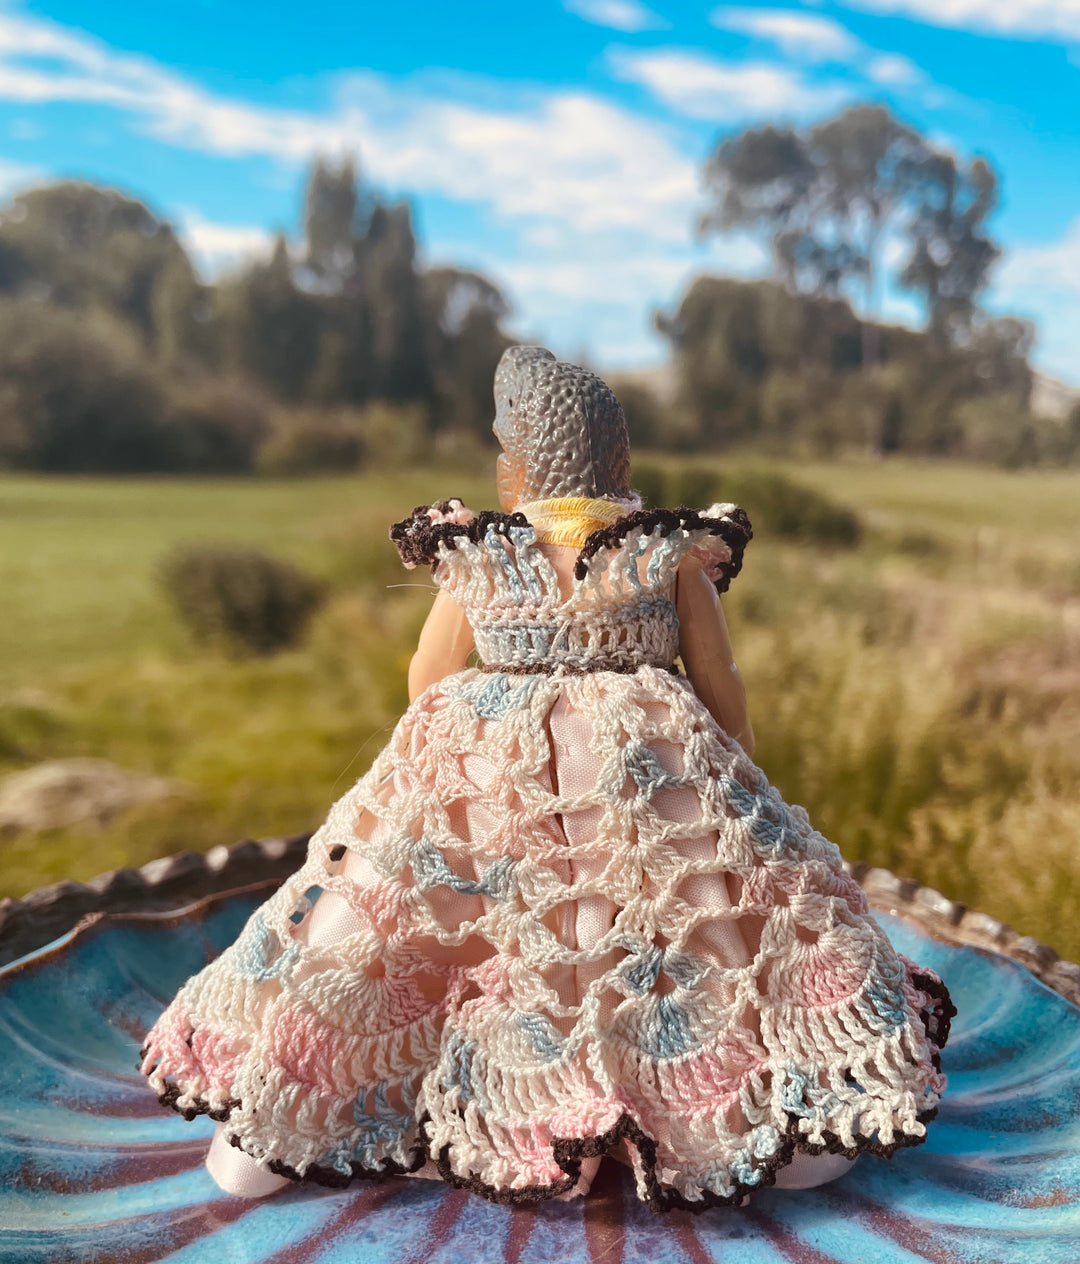 Backside, Vintage doll in a pastel crochet dress, satin petticoat with a dinosaur head. 4" tall x 3" wide